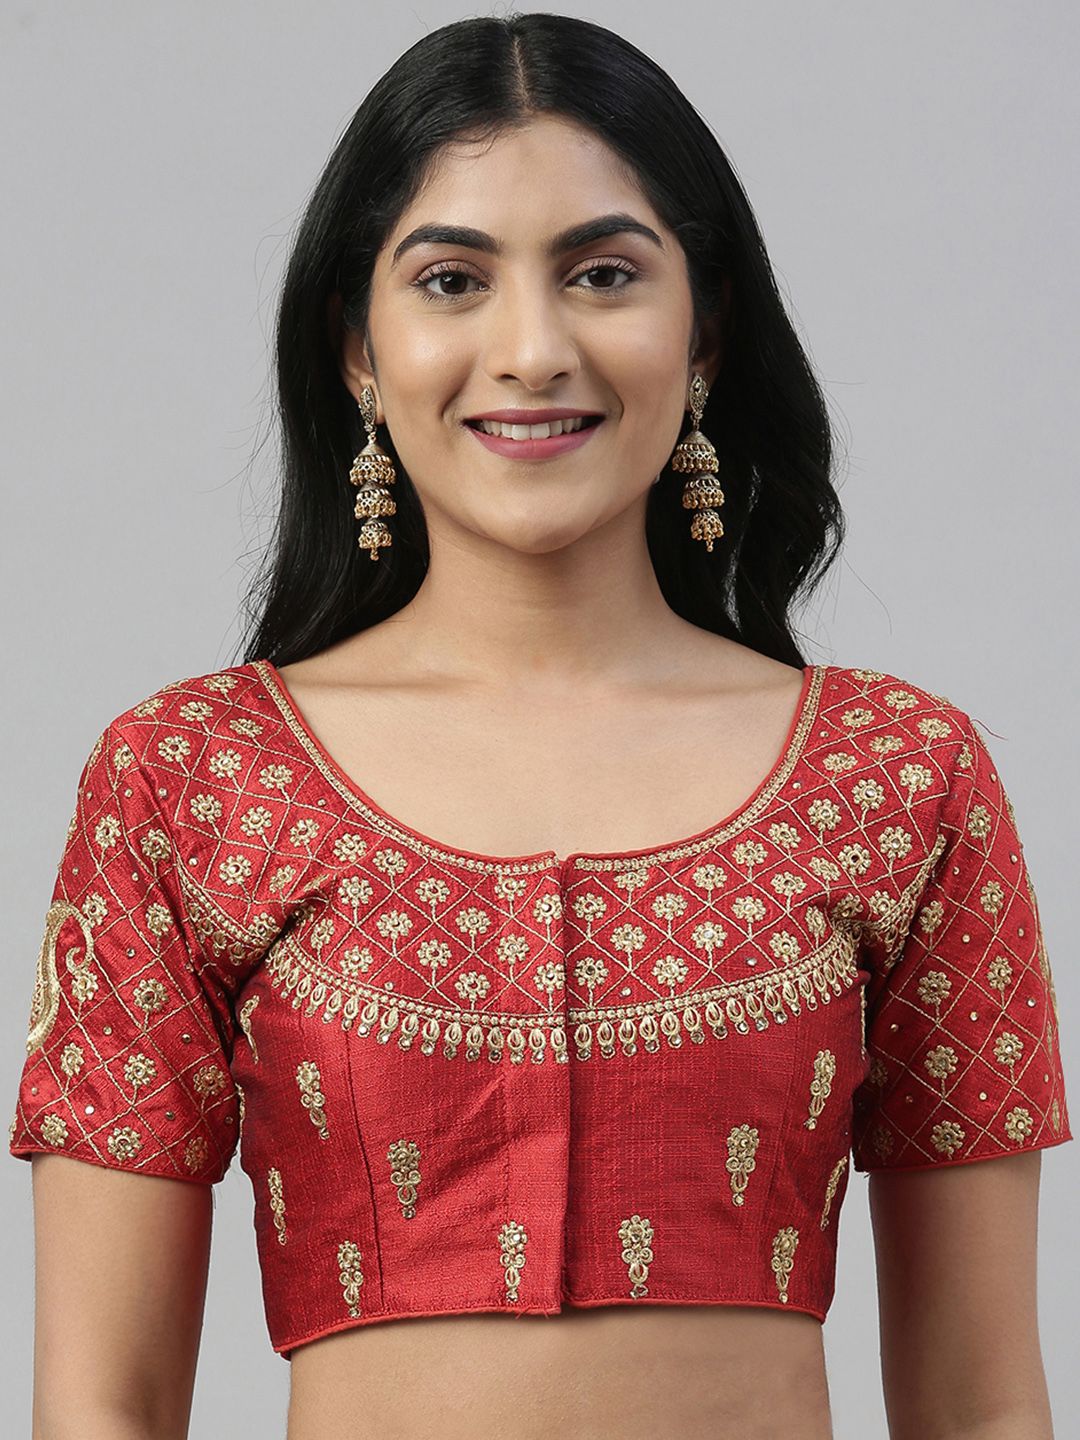 Mimosa Women Red & Golden Zari Embroidered Saree Blouse Price in India